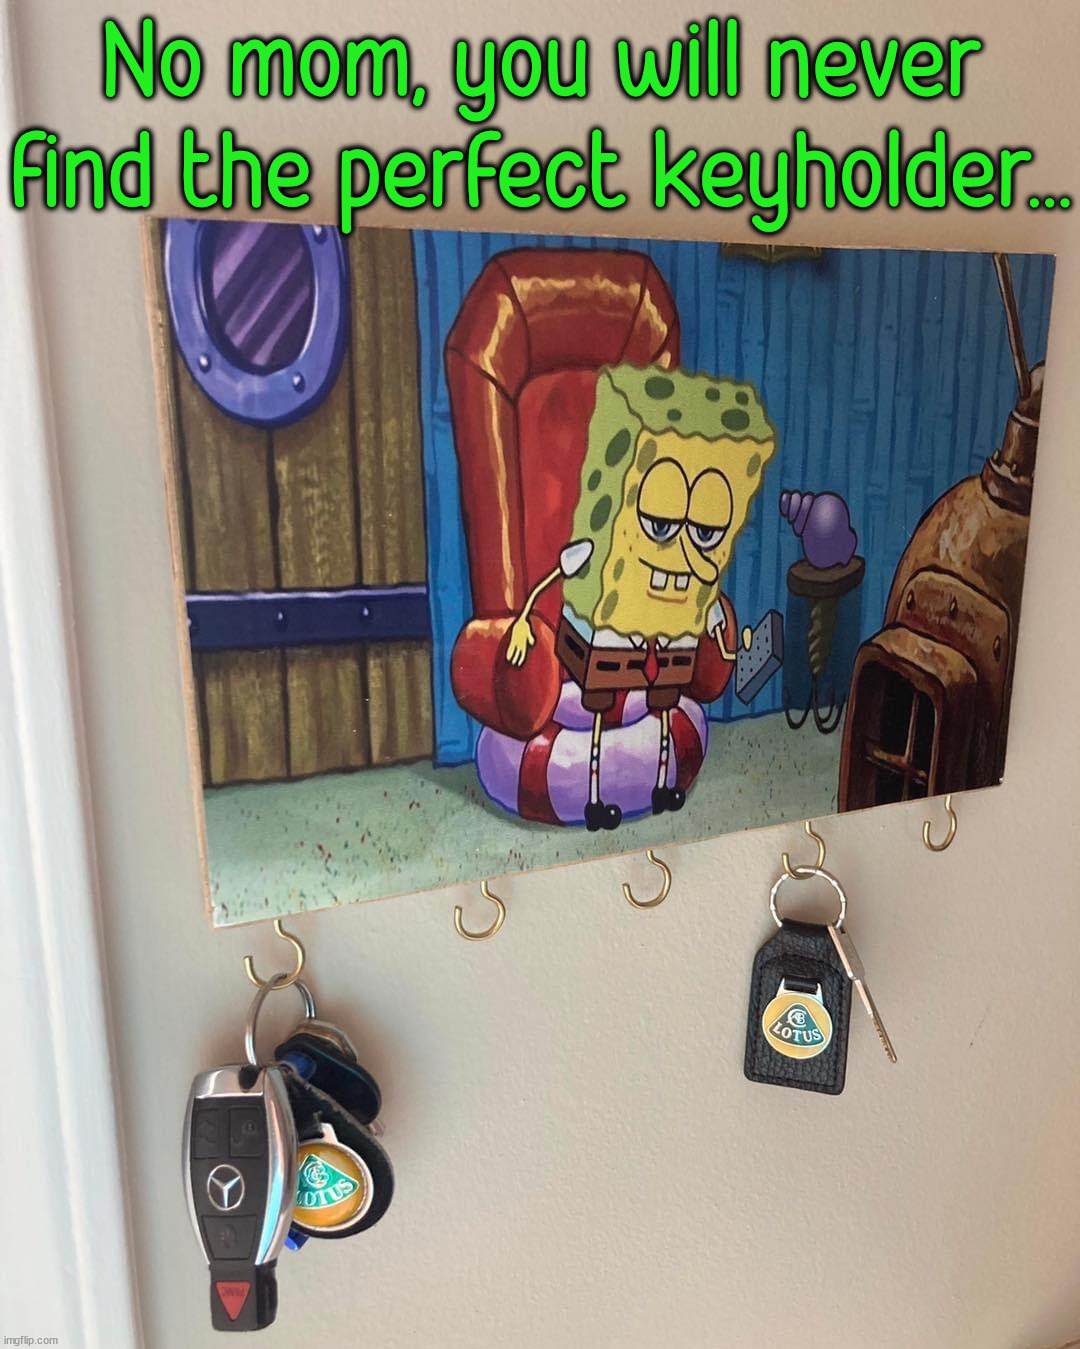 I'm outta here | No mom, you will never find the perfect keyholder... | image tagged in perfection,i'm outta here,spongebob,keys,the best | made w/ Imgflip meme maker